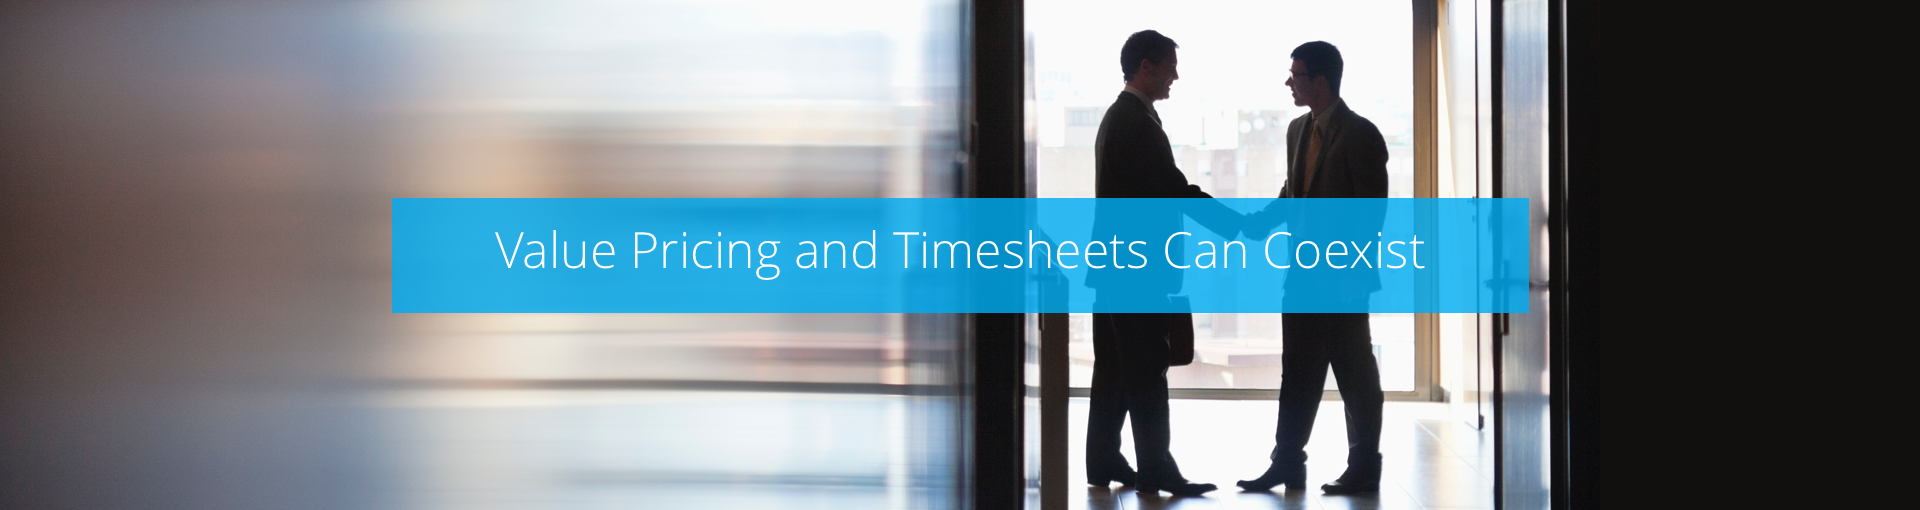 Value Pricing and Timesheets Can Coexist